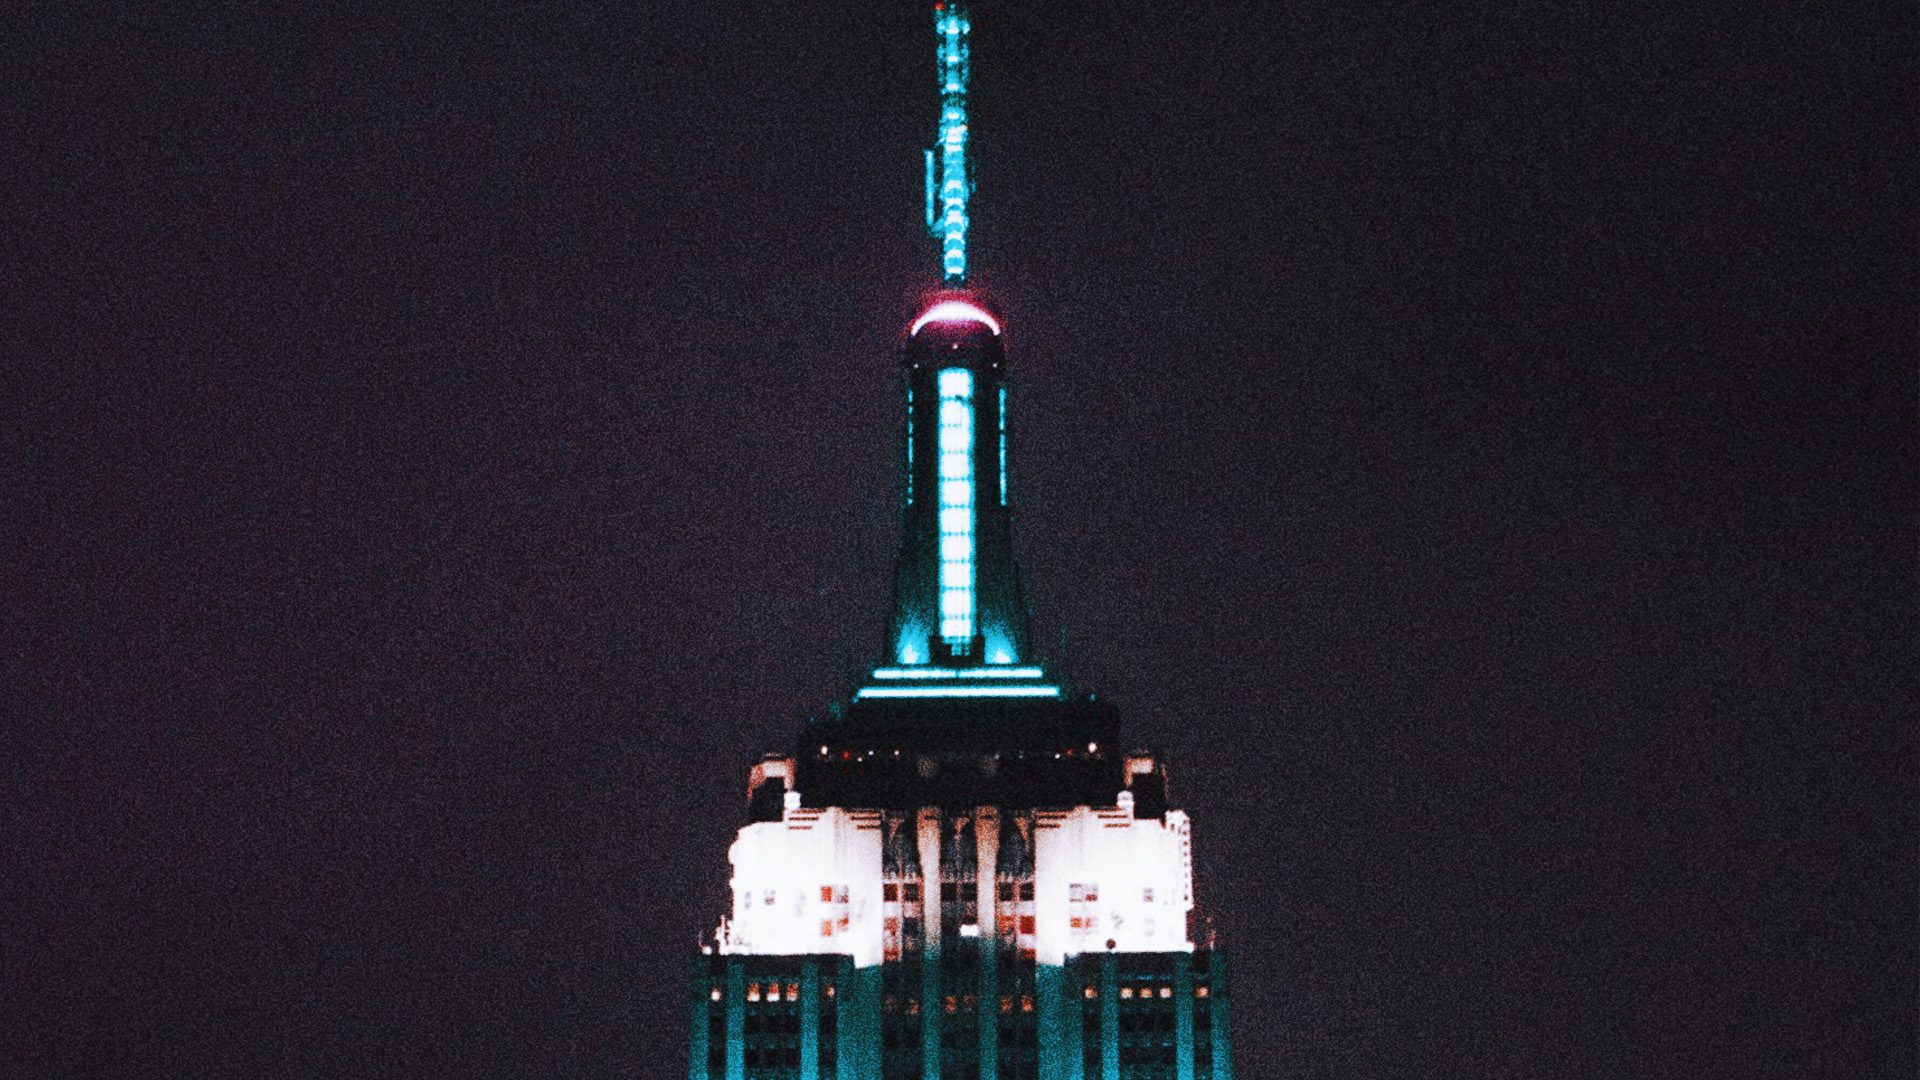 Empire State Building celebrates wins from Eagles, Chiefs